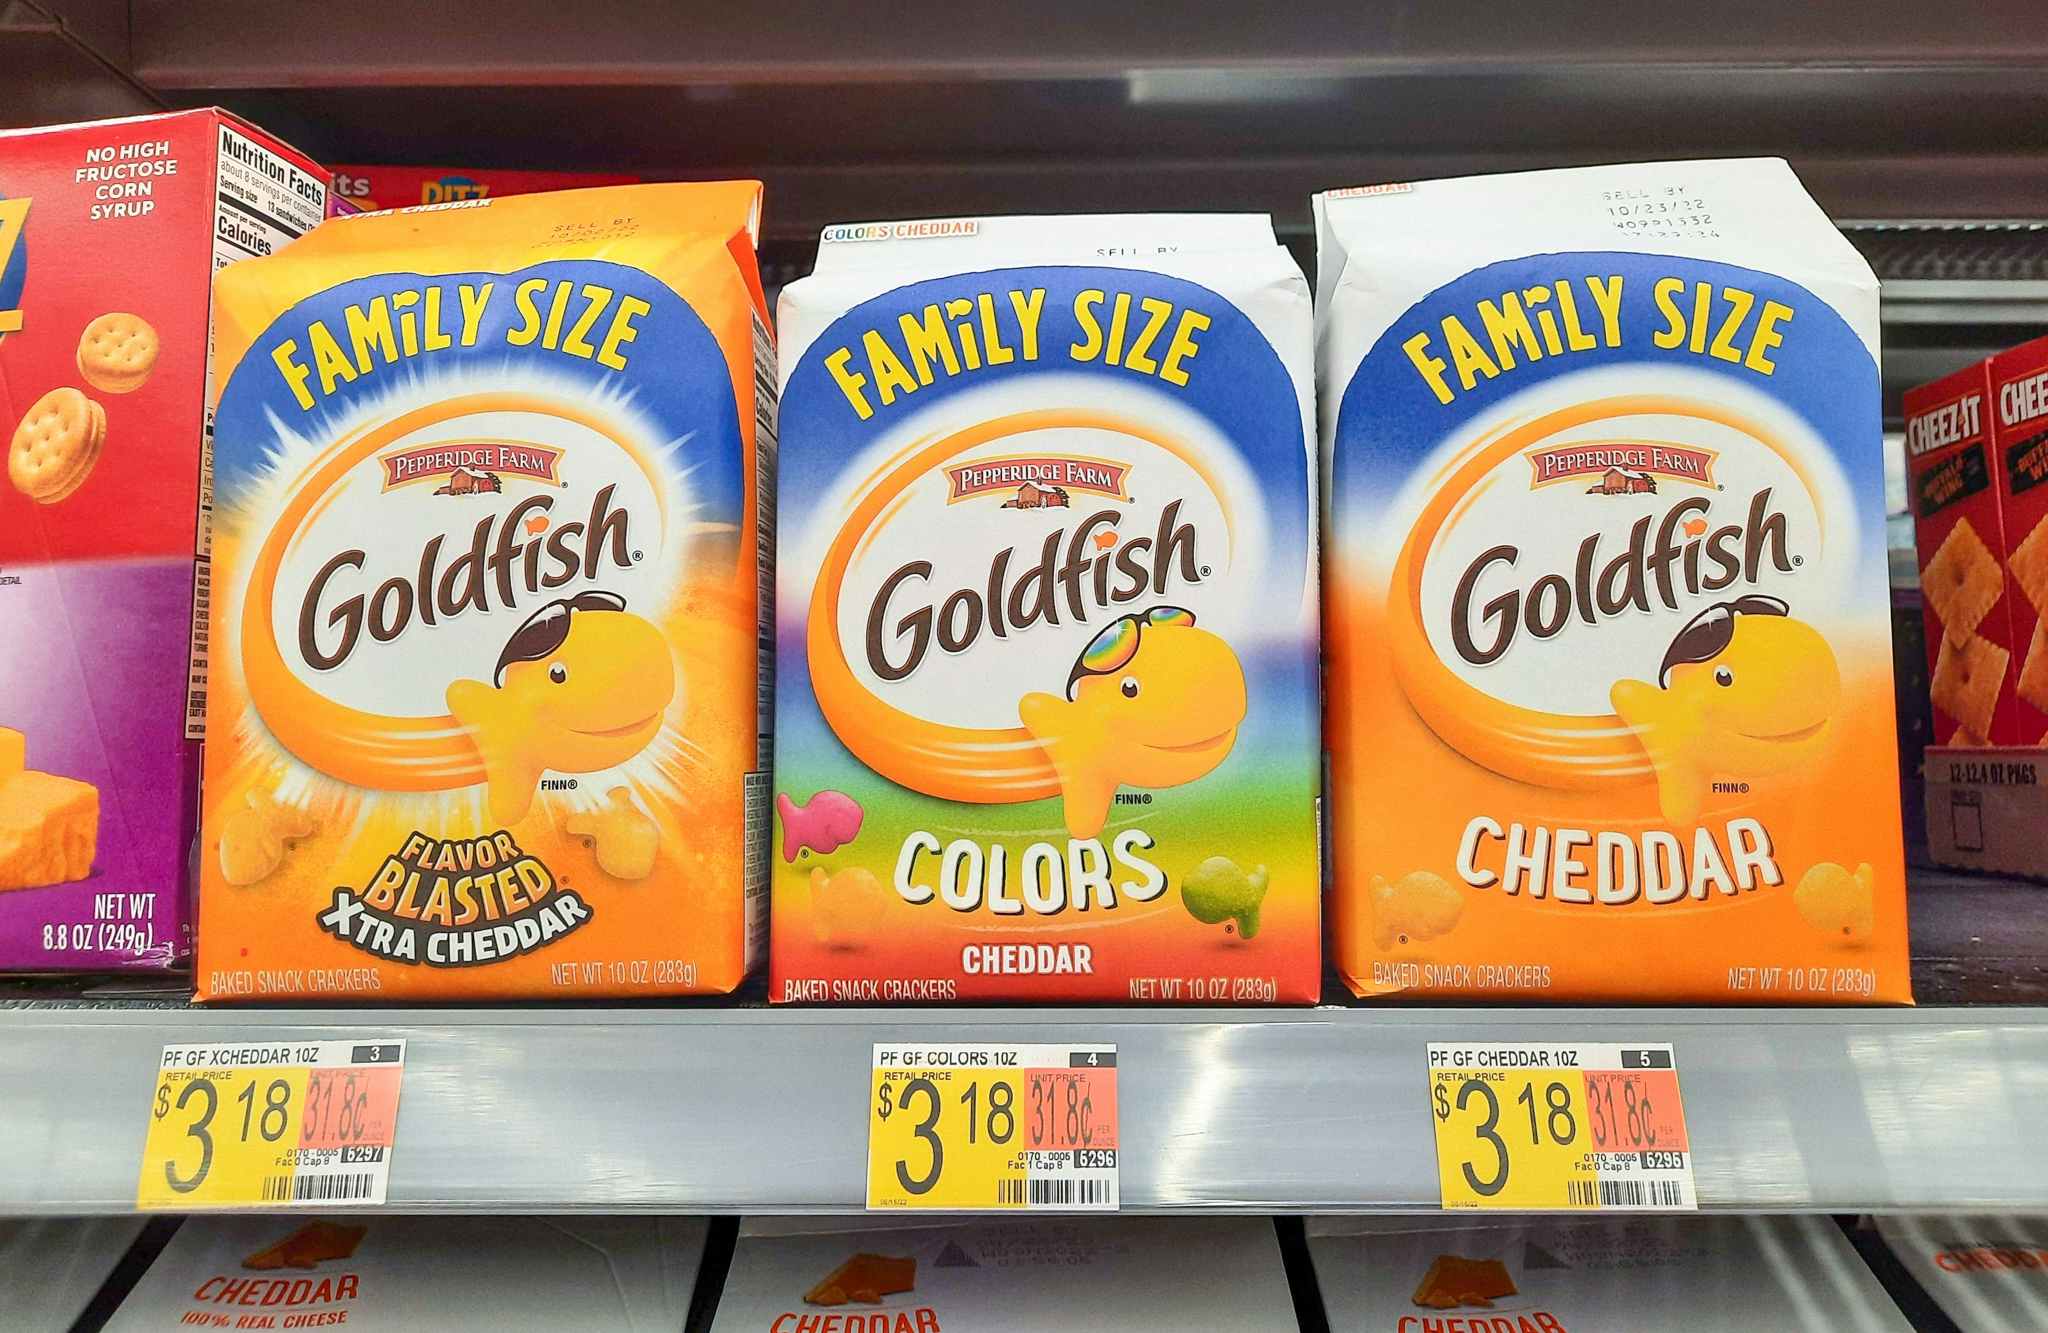 Family size bags of Goldfish on display at Walmart. Price tag on the shelf reads $3.18.